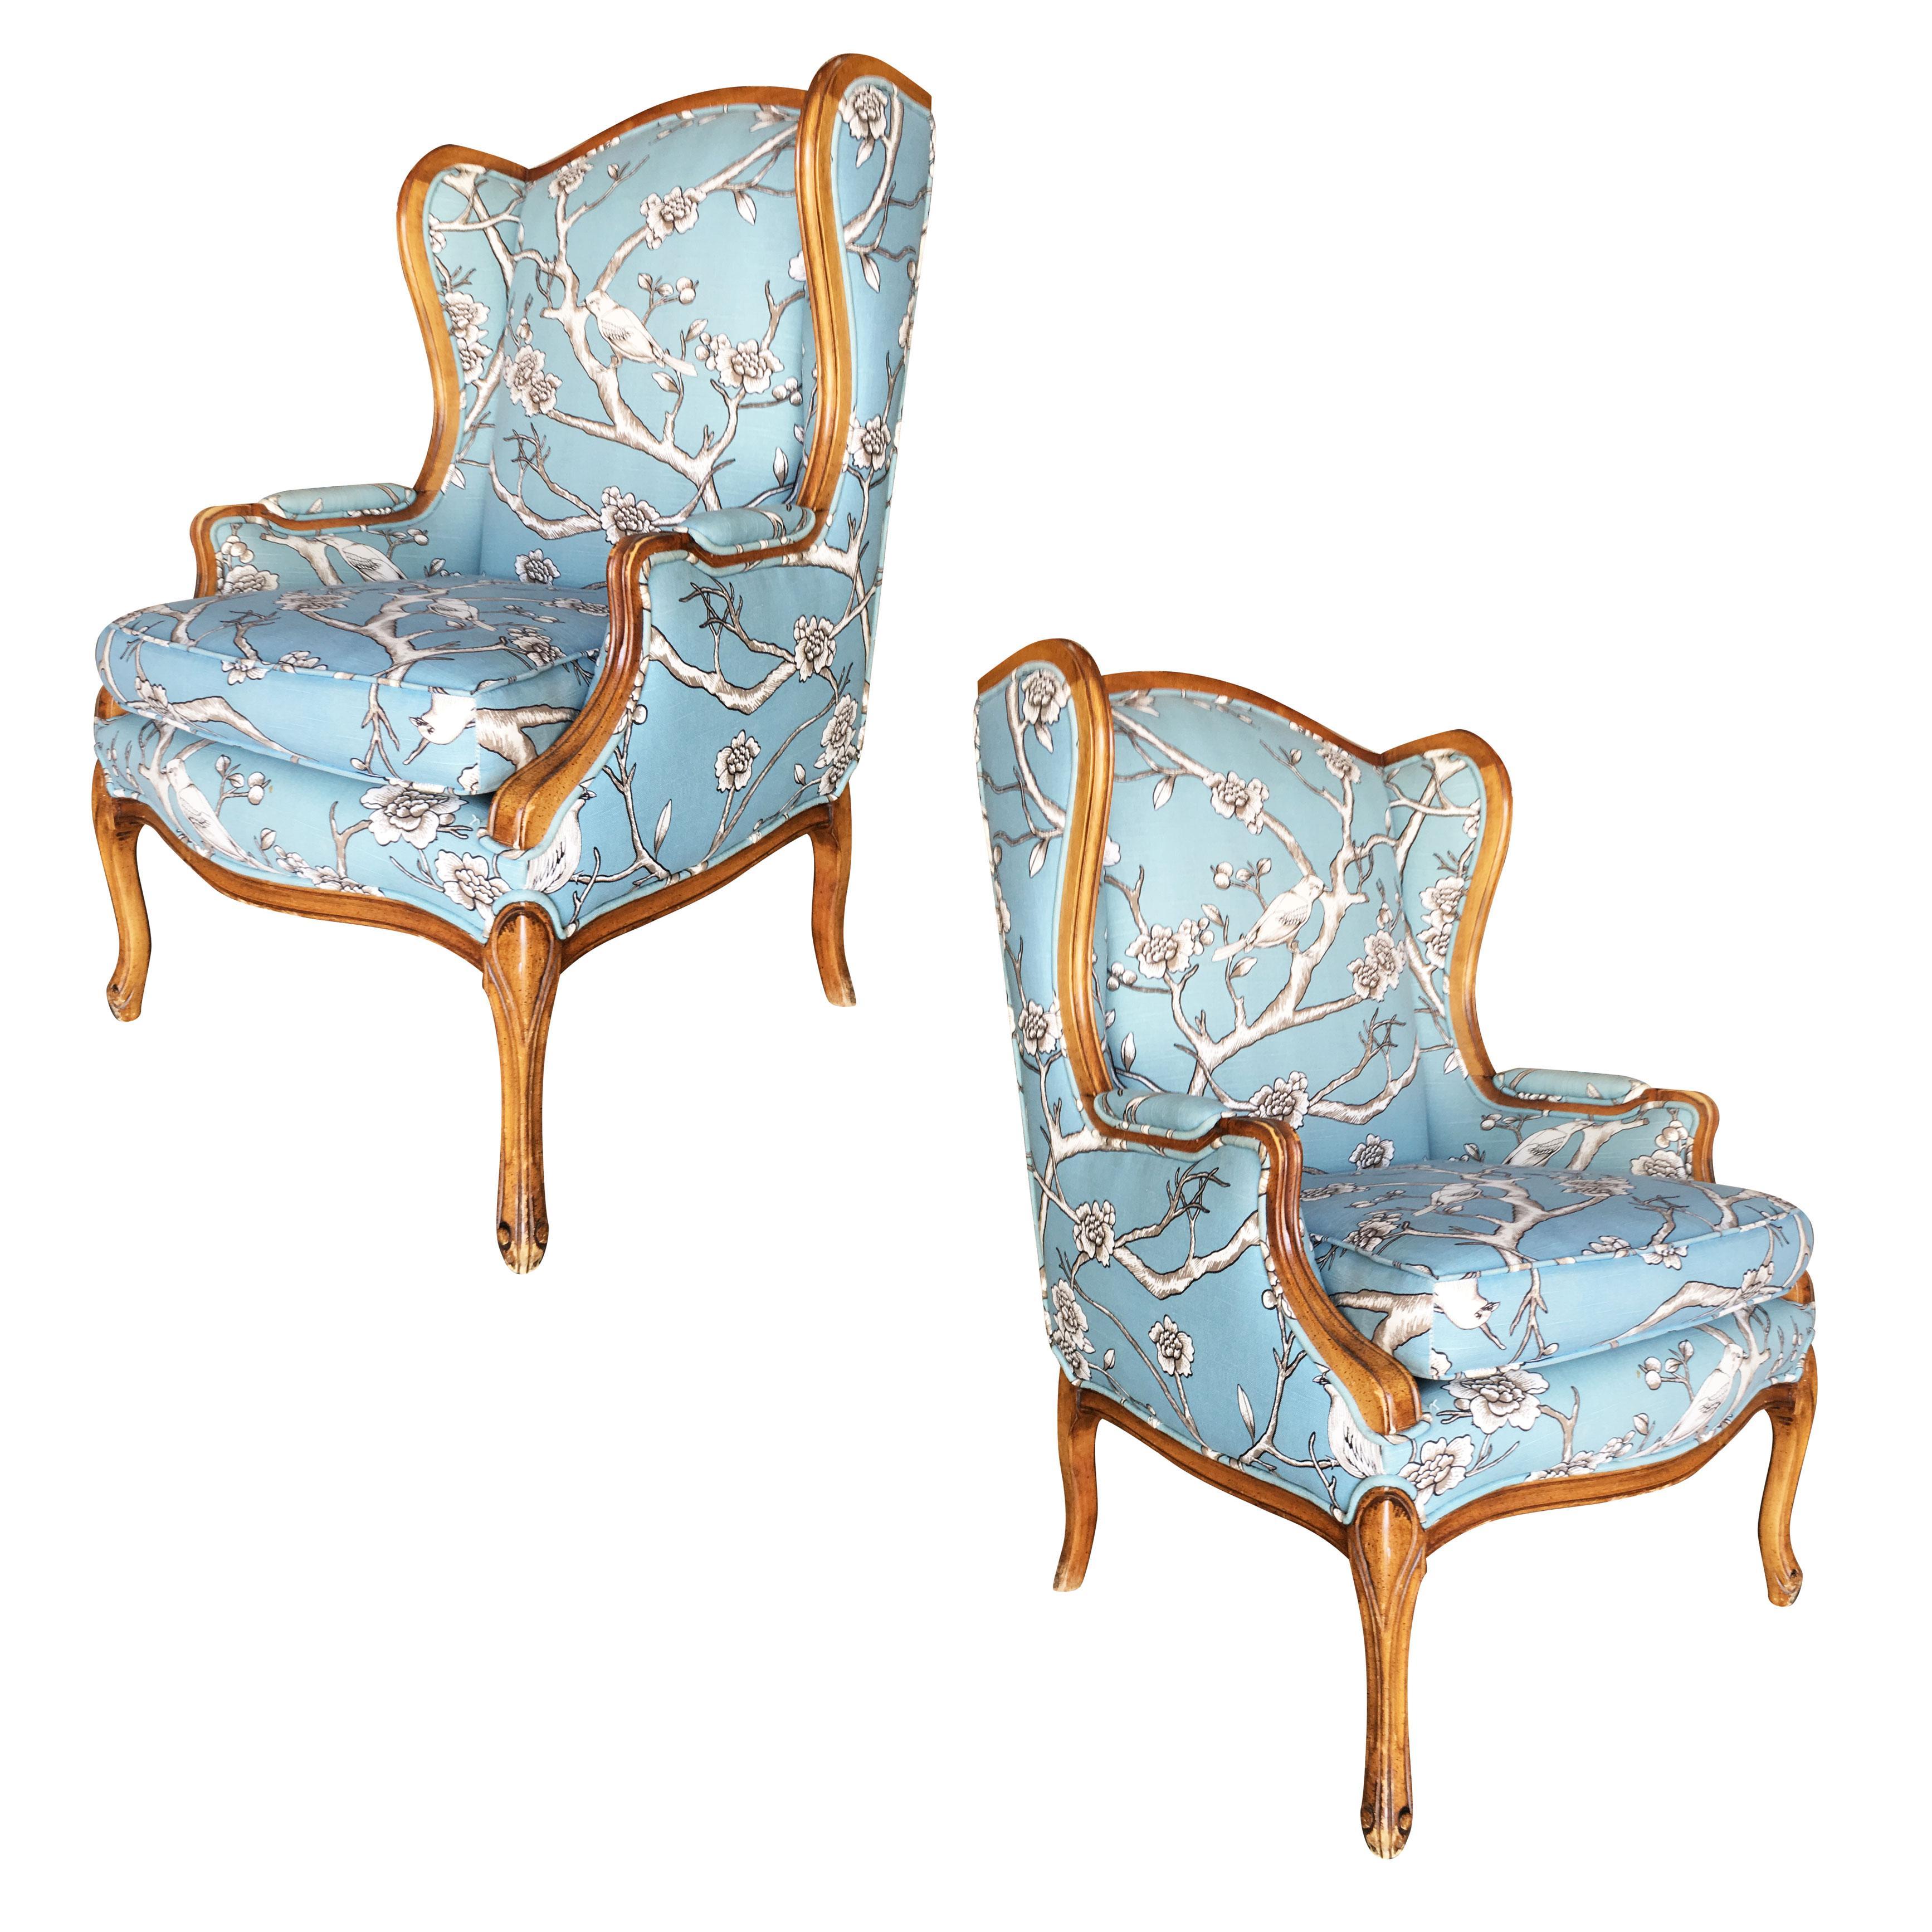 Vintage pair of French Country inspired walnut wing back lounge chairs. The chairs feature a hand carved frame with blue floral fabric upholstery, circa 1950.